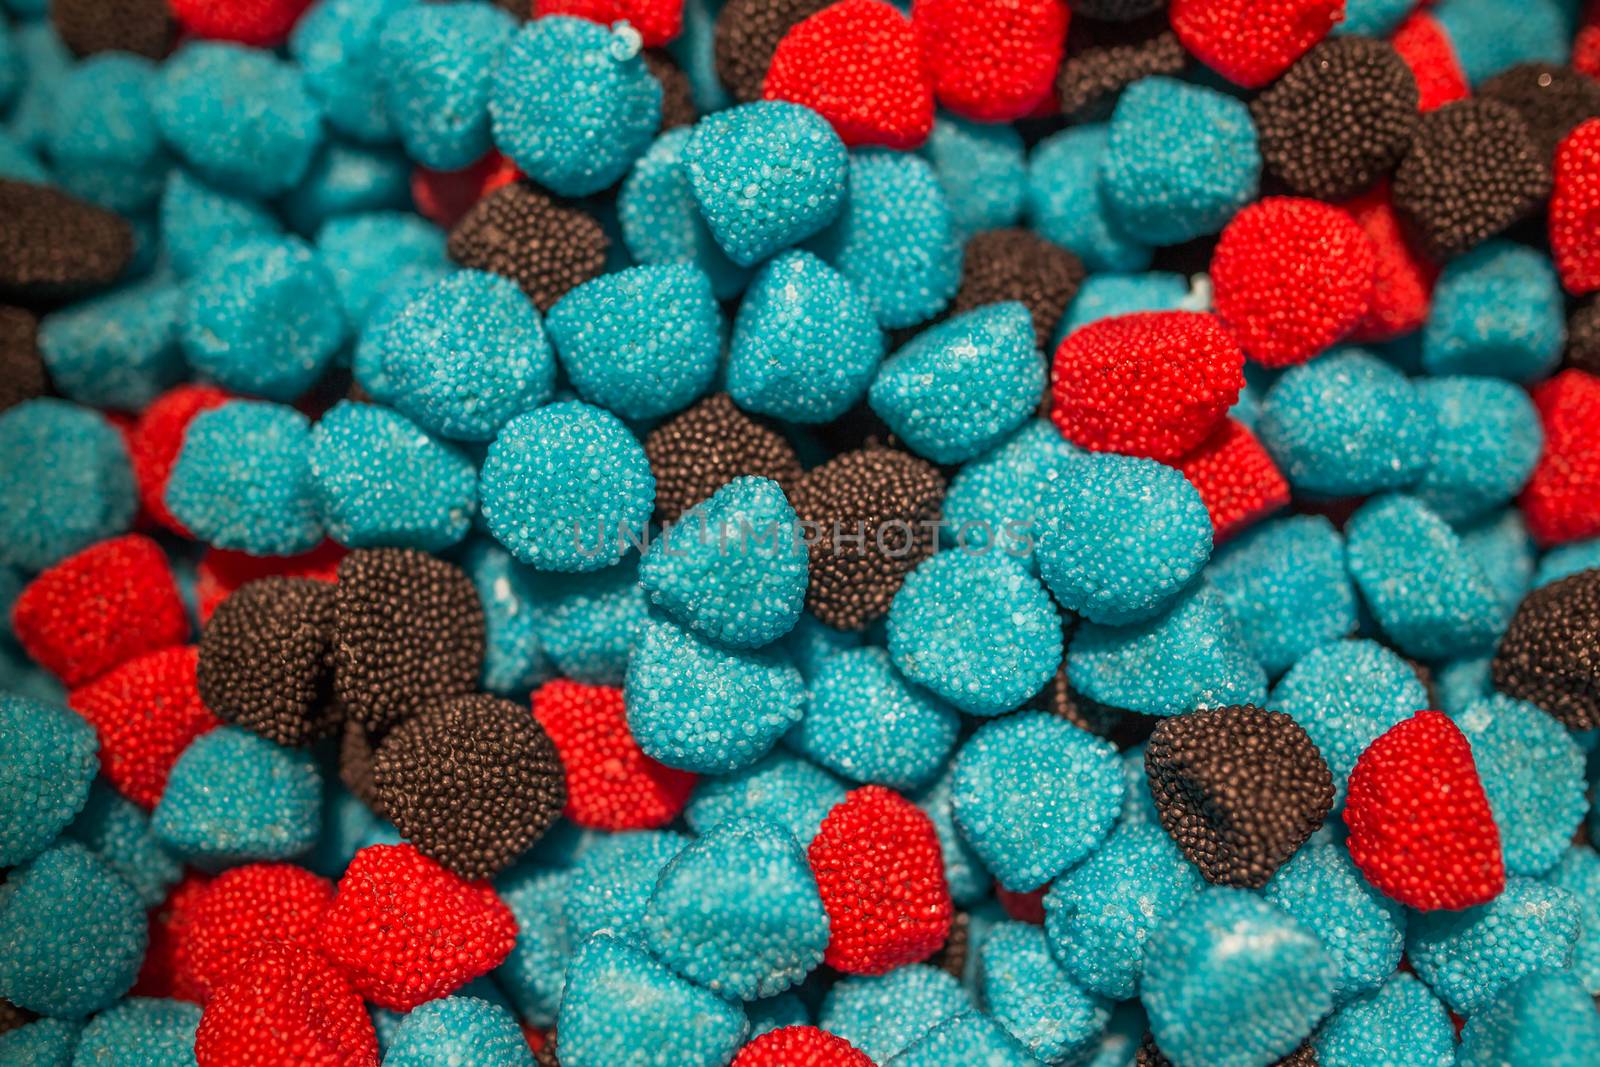 Blue black and red candies in the form of raspberries and blackberries by petrsvoboda91